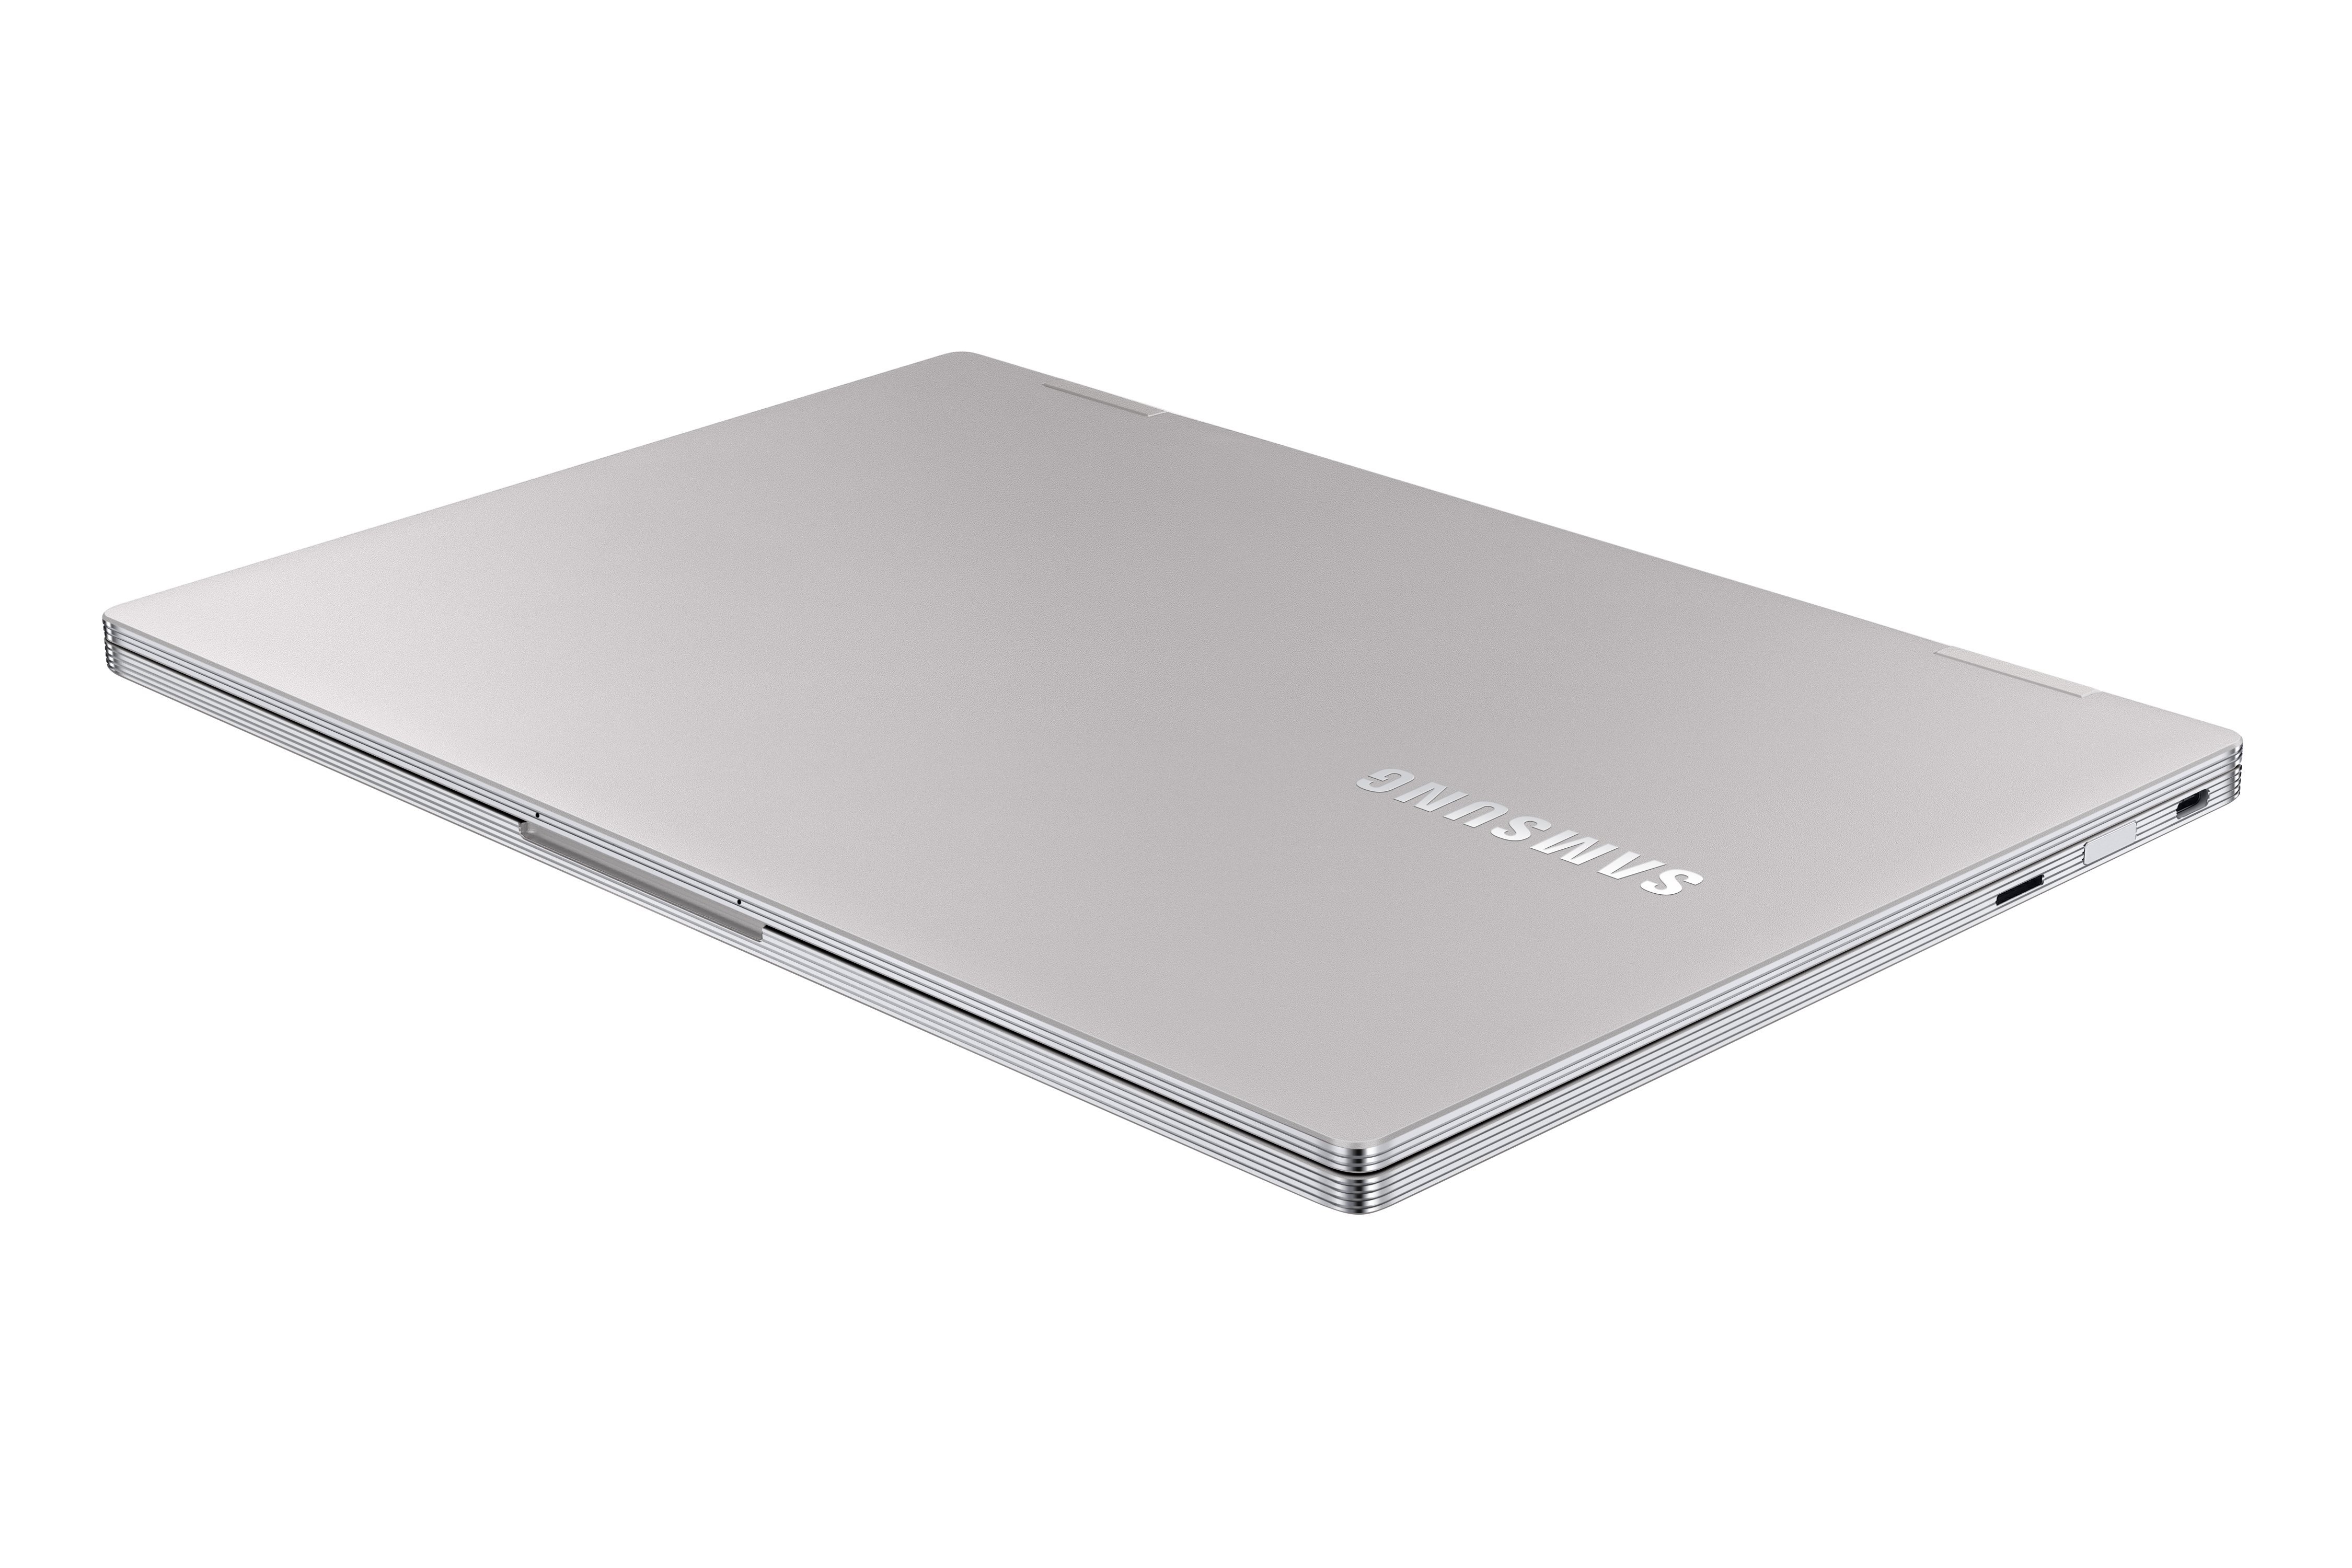 samsung notebook series 9 specifications